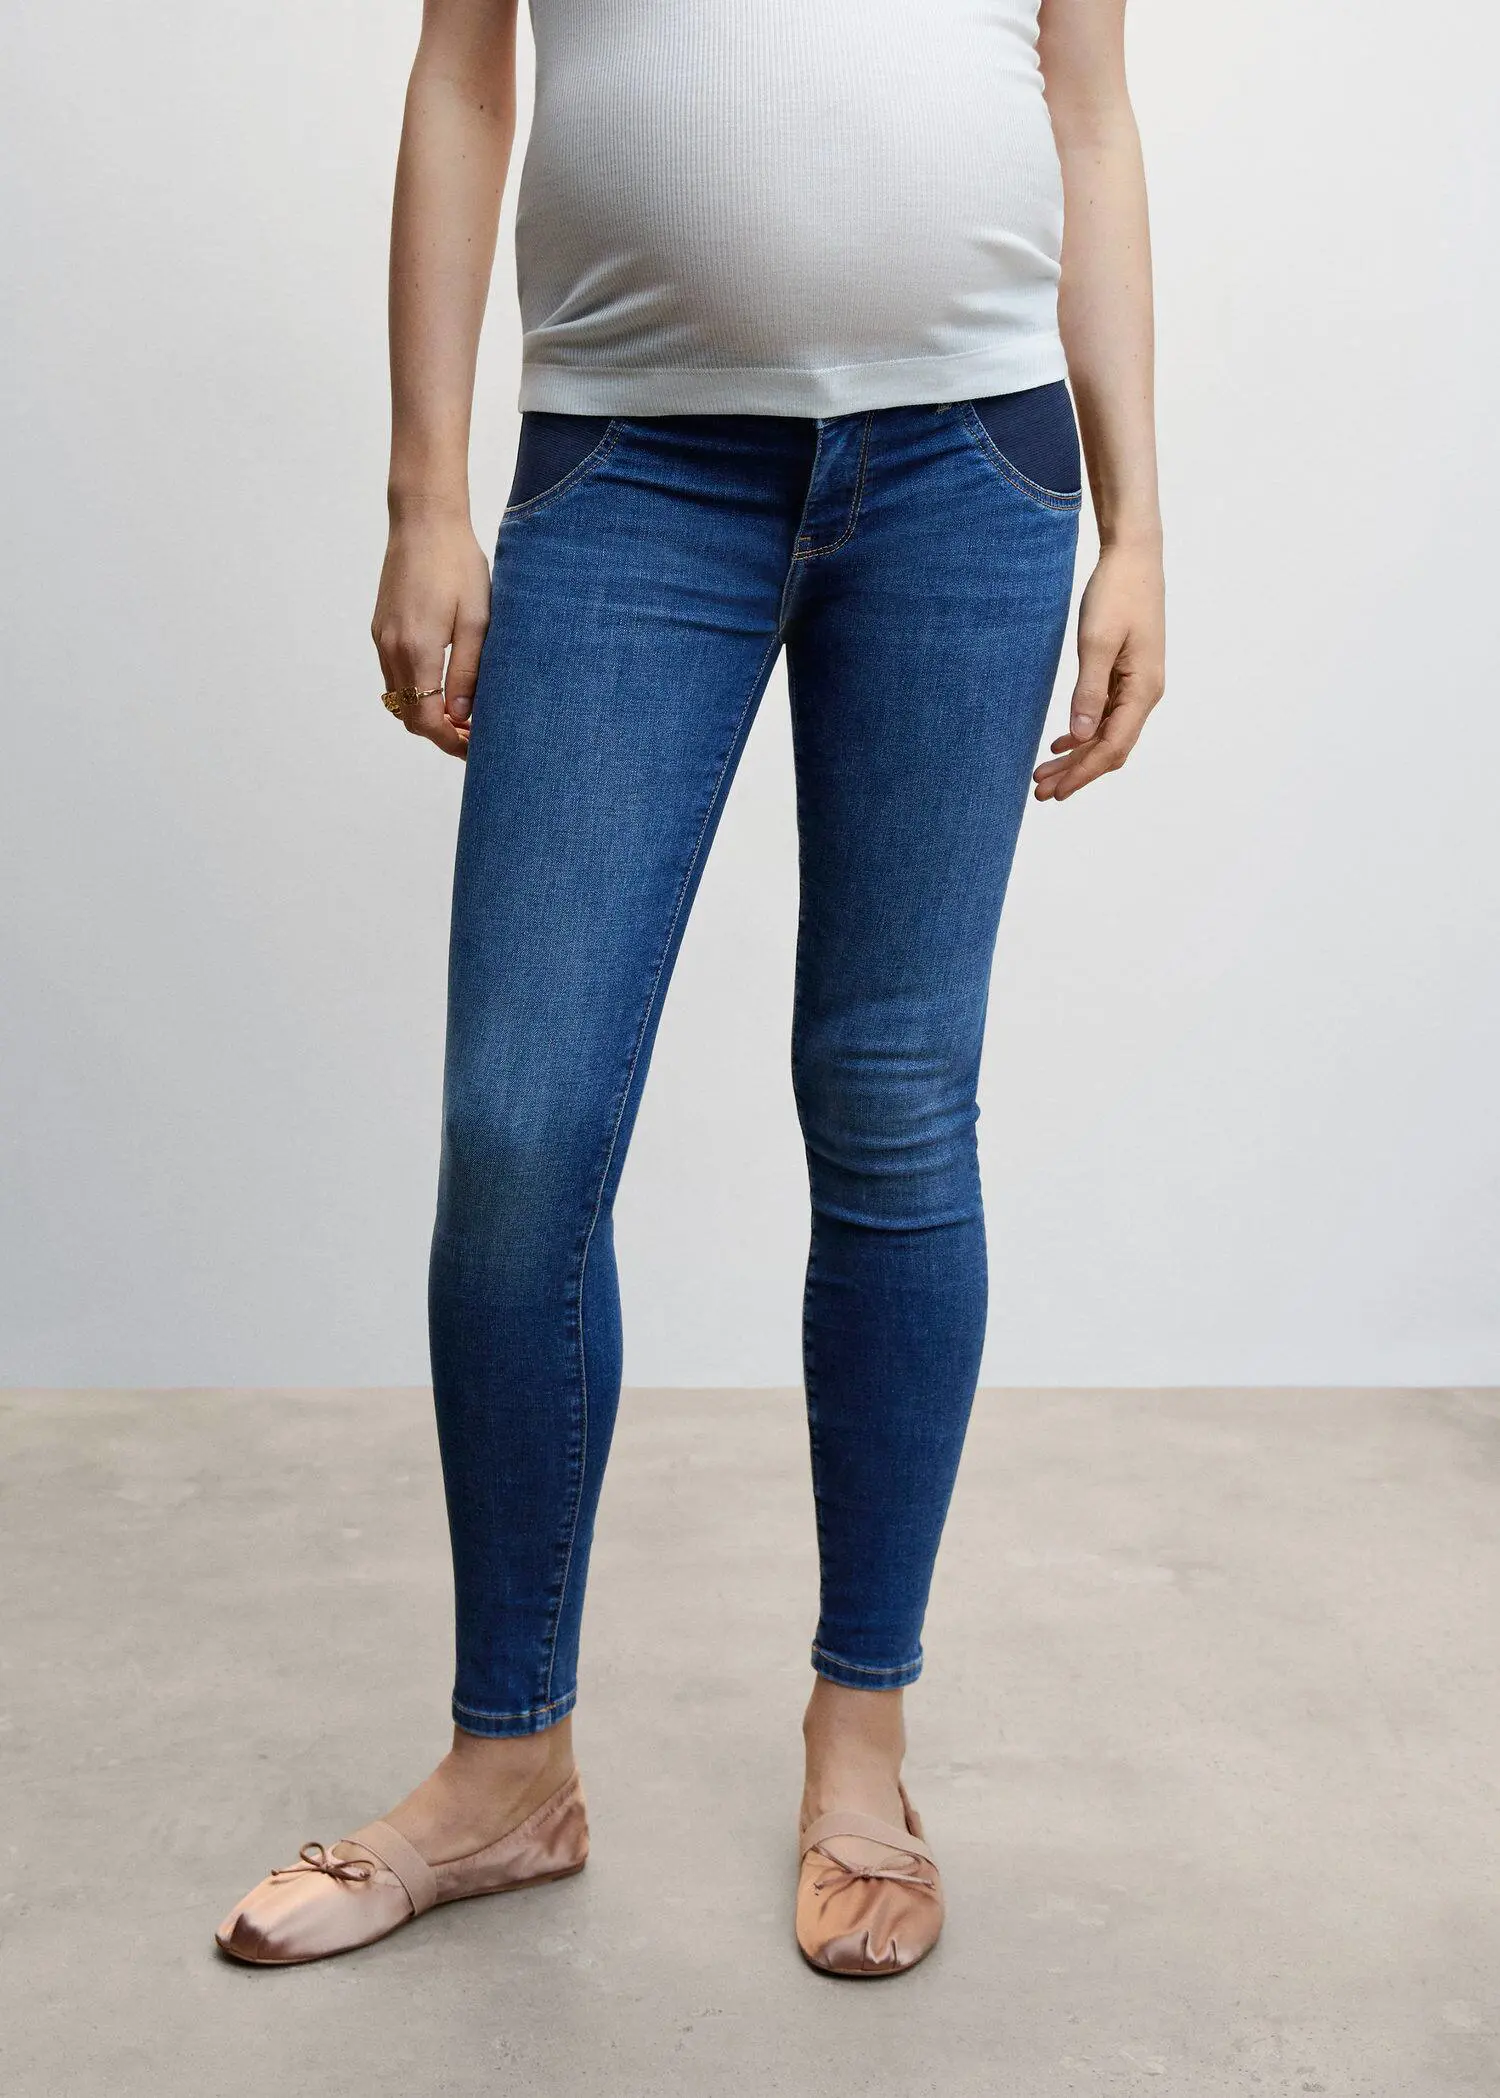 Mango Maternity skinny jeans. a woman standing with her legs crossed wearing jeans. 